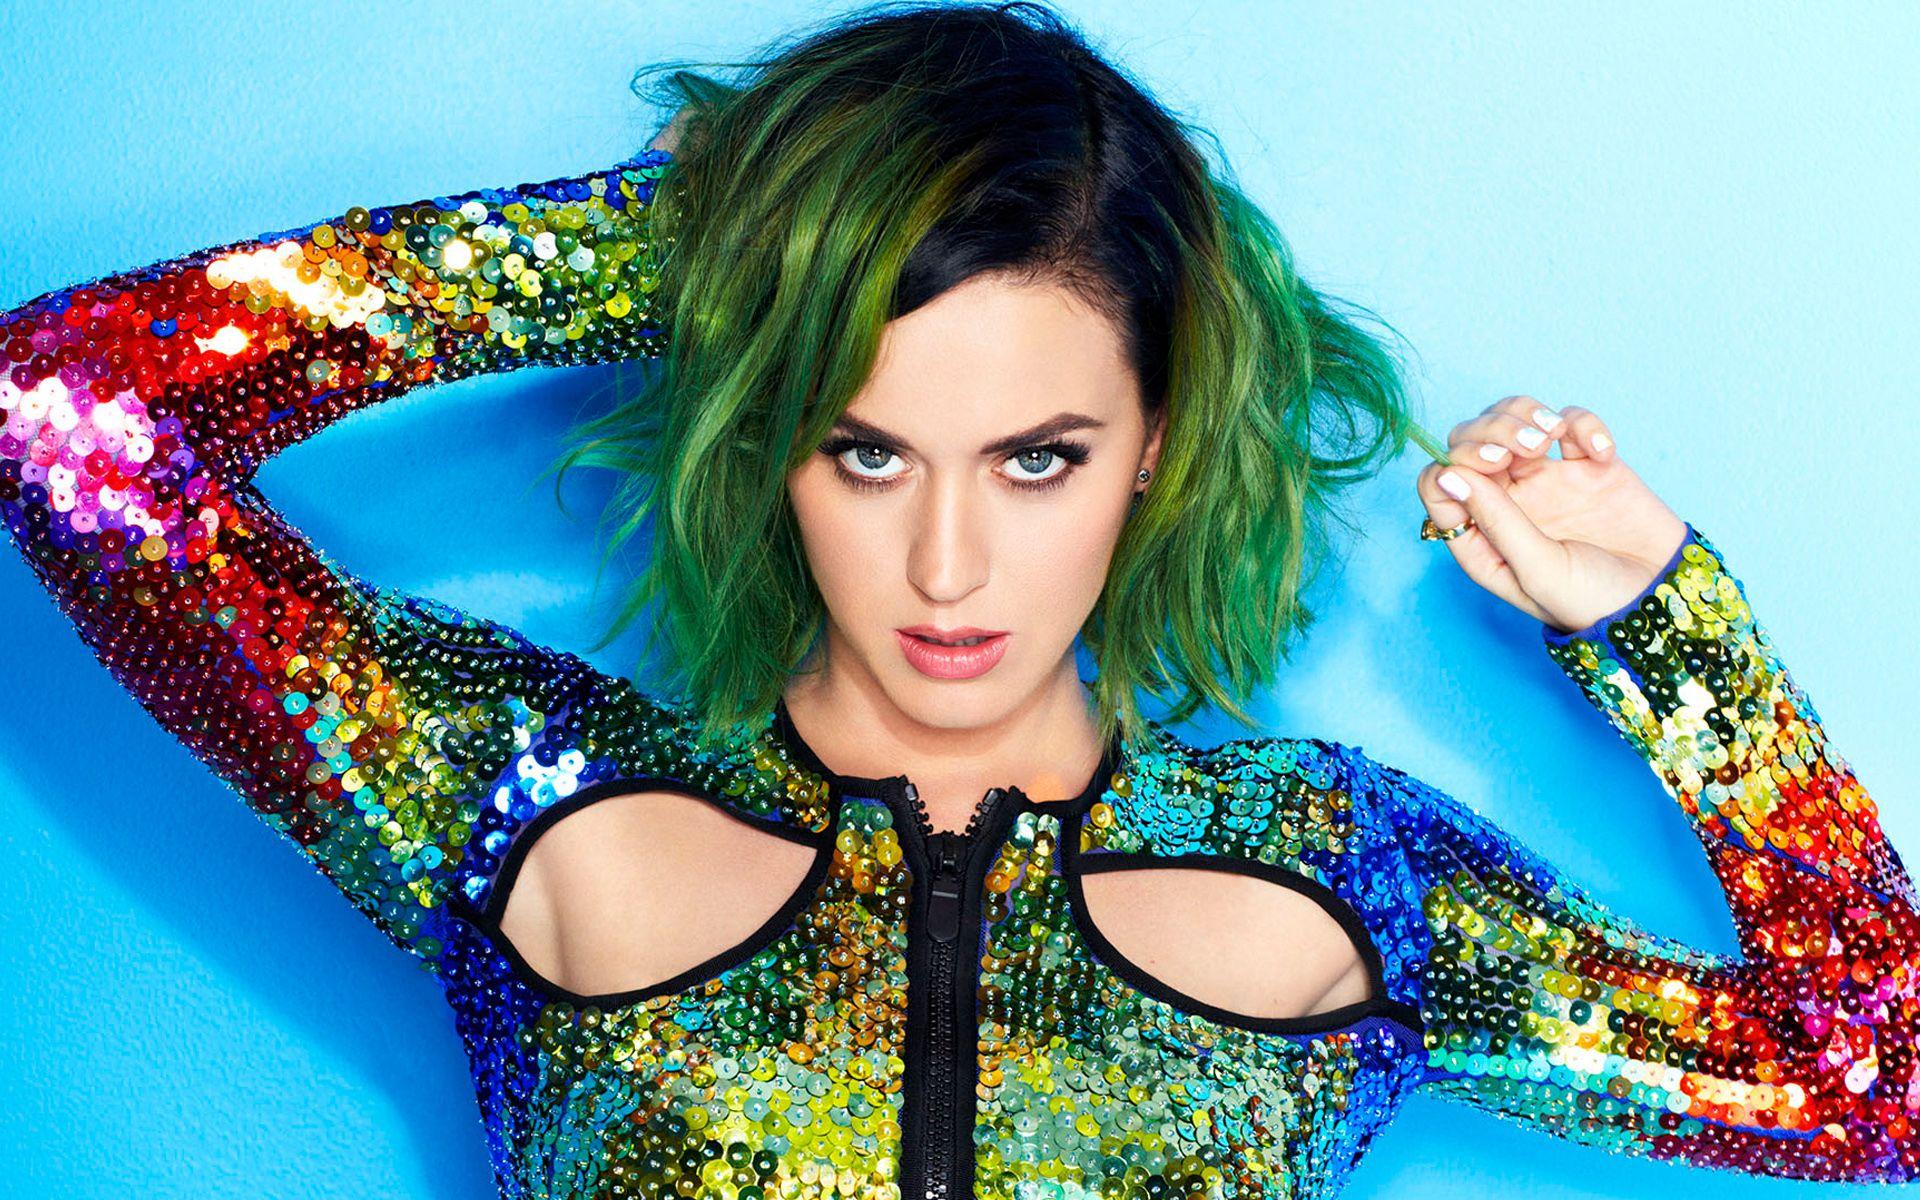 Katy Perry Wallpaper Background Free Download > SubWallpaper